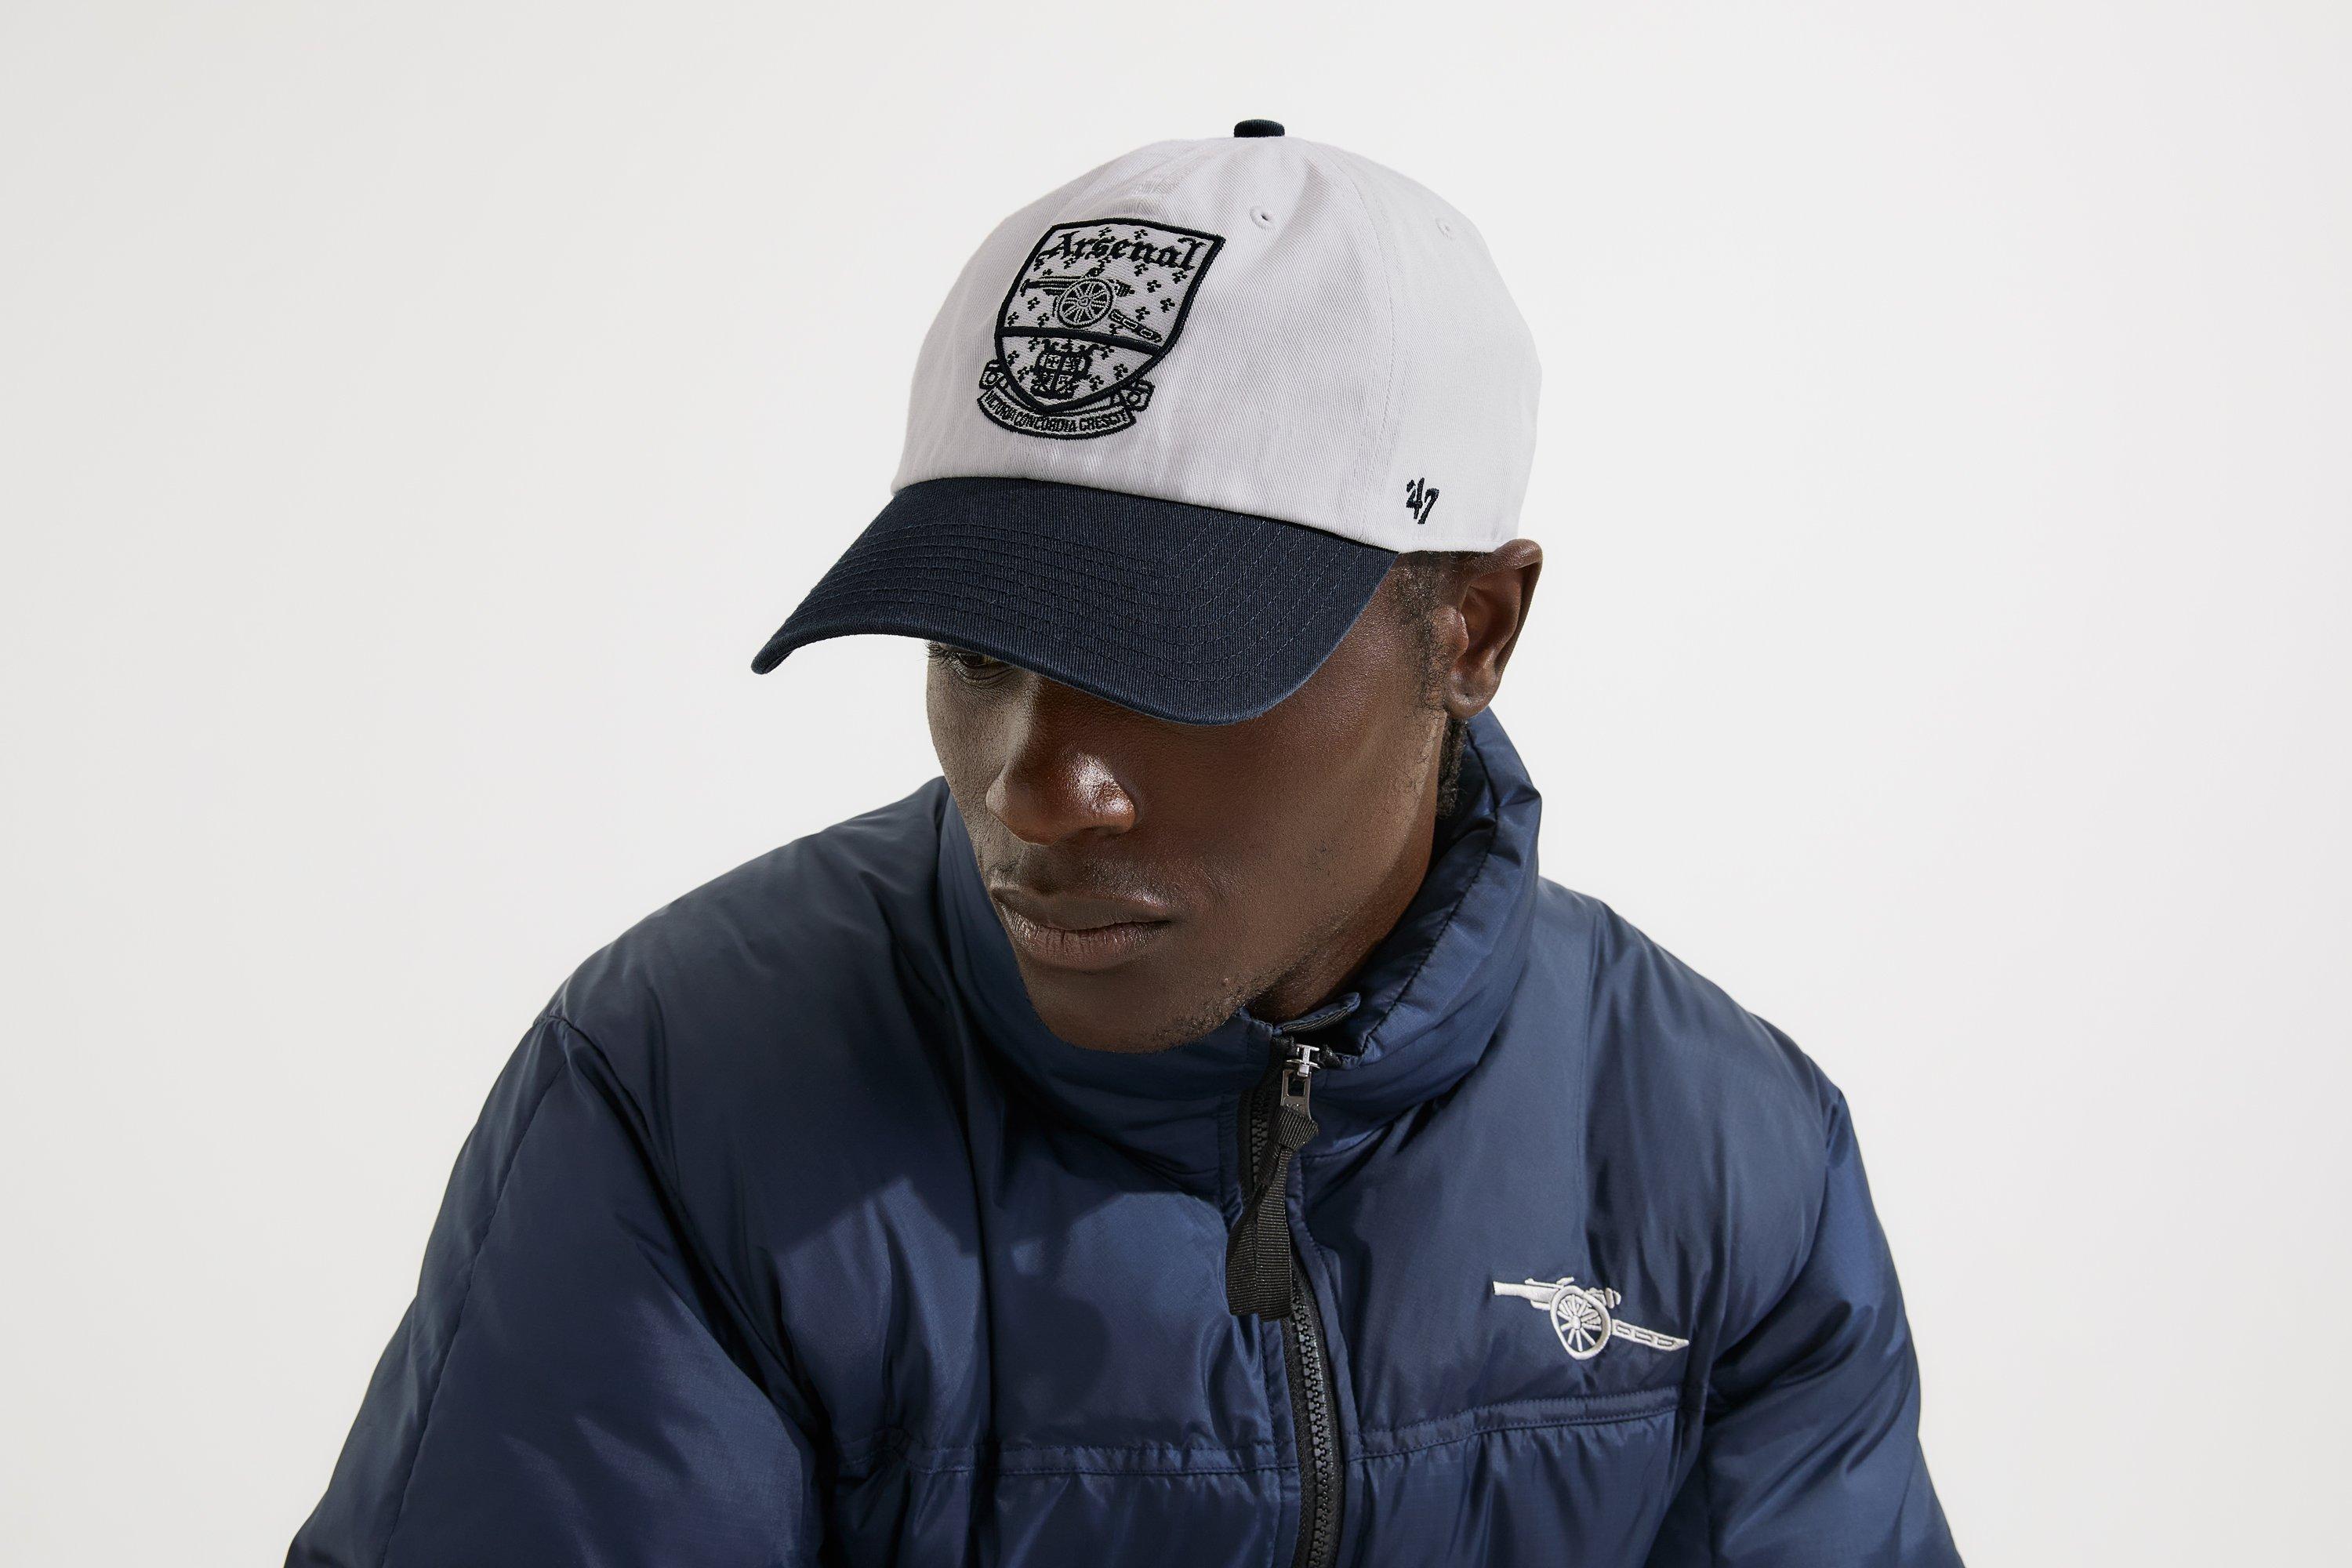 Arsenal 47 Two-Tone Navy and White Concordia Crest Cap